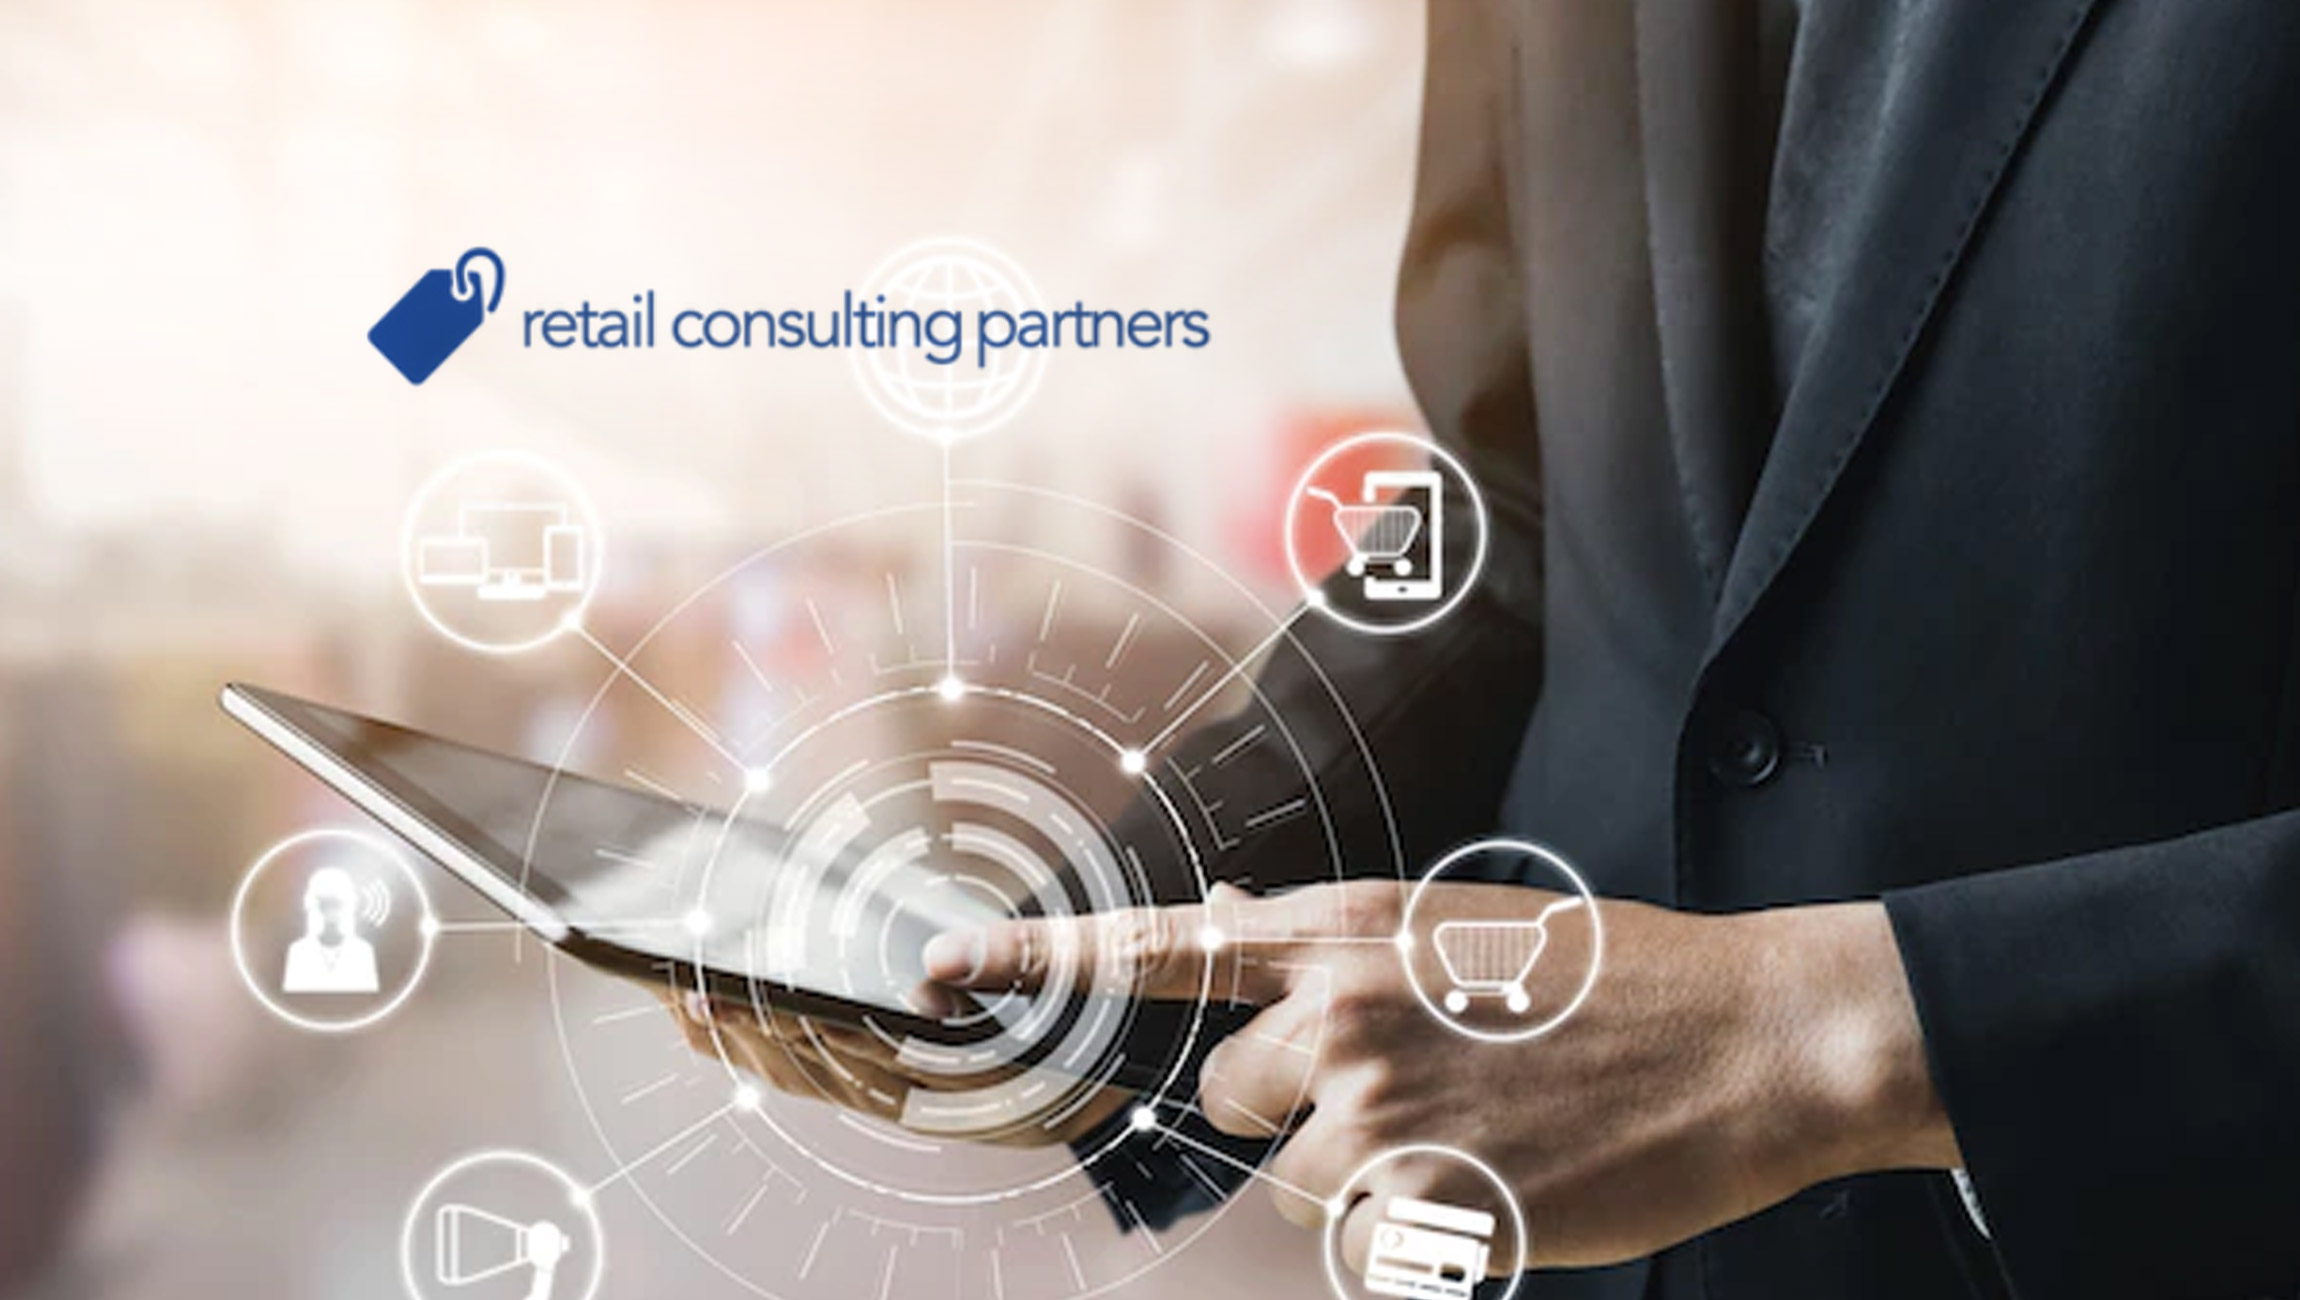 Majority of Retailers Deliver Omni-Channel Capabilities, But Very Few Have Implemented a Unified Commerce Platform, According to RCP’s Latest Retail Industry Report